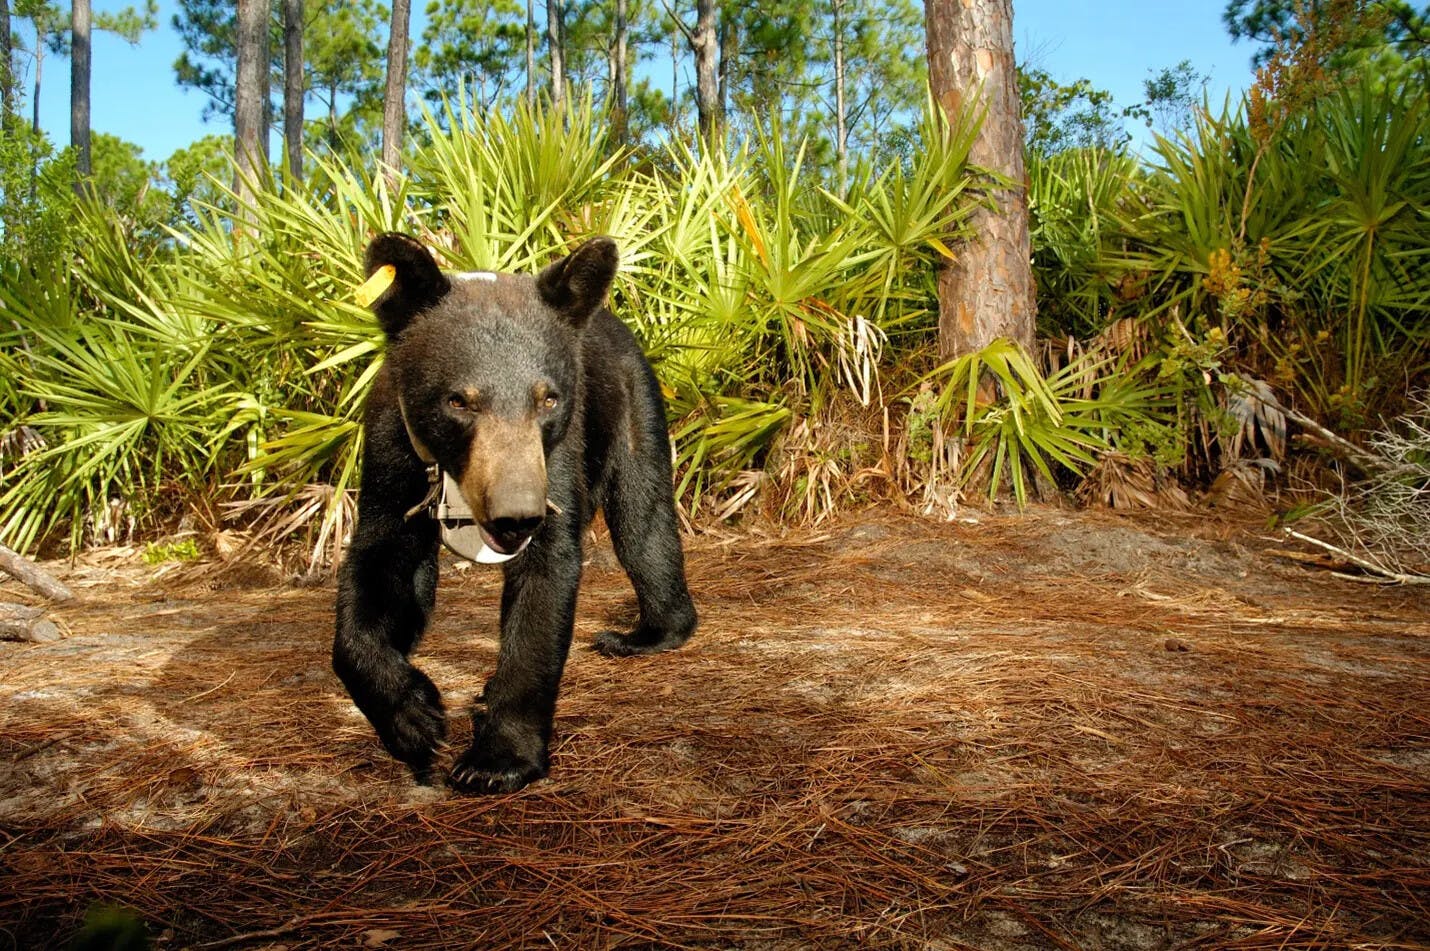 A young female bear wearing a GPS collar as part of the University of Kentucky’s telemetry study, and known to researchers as F011, approaches a remote camera trap overlooking a buggy trail through a stand of pine flatwoods. Researchers deployed GPS collars with programmable breakaway devices which allow the collars to detach automatically on a desired date. Highlands County, Florida